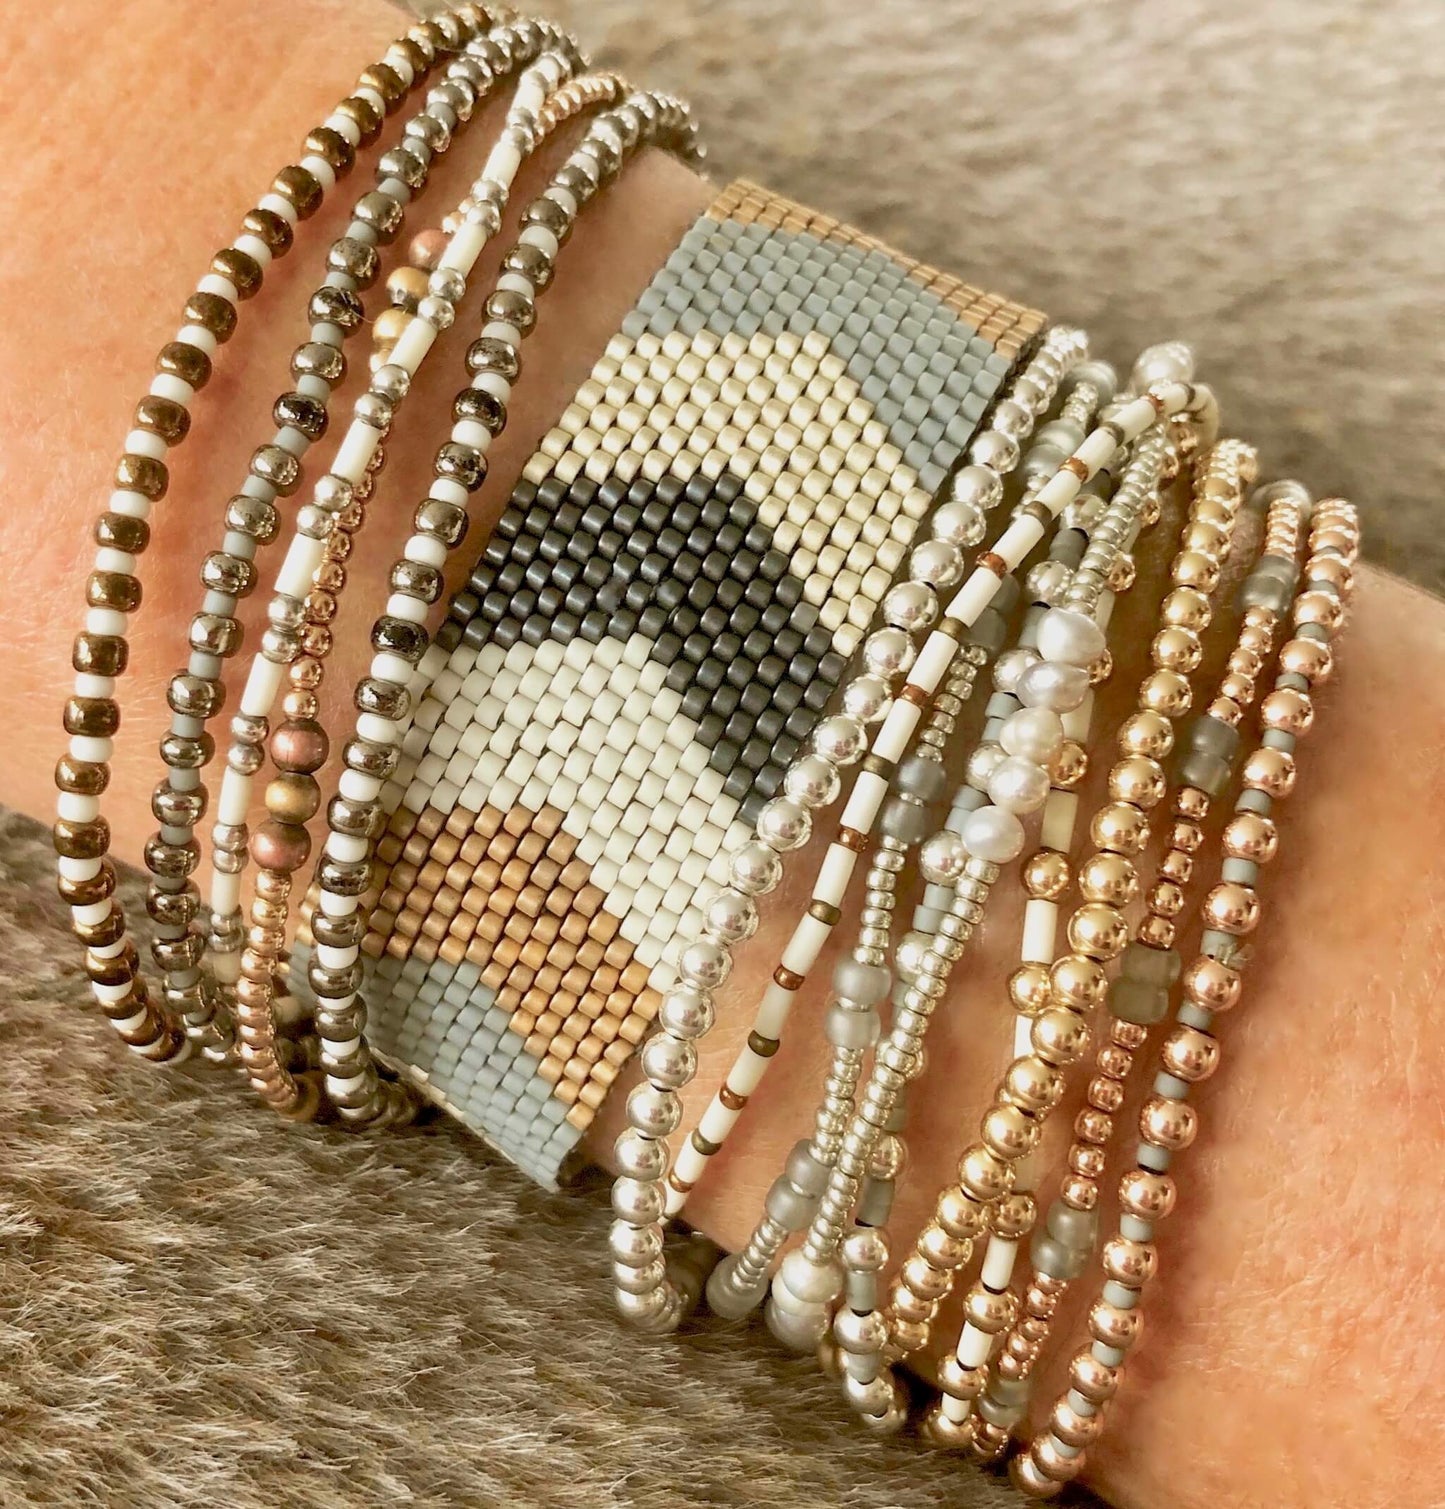 Neutral color gold and silver beaded stretch and woven bracelet stack with handmade chevron cuff band, seed beads, and mixed metals.